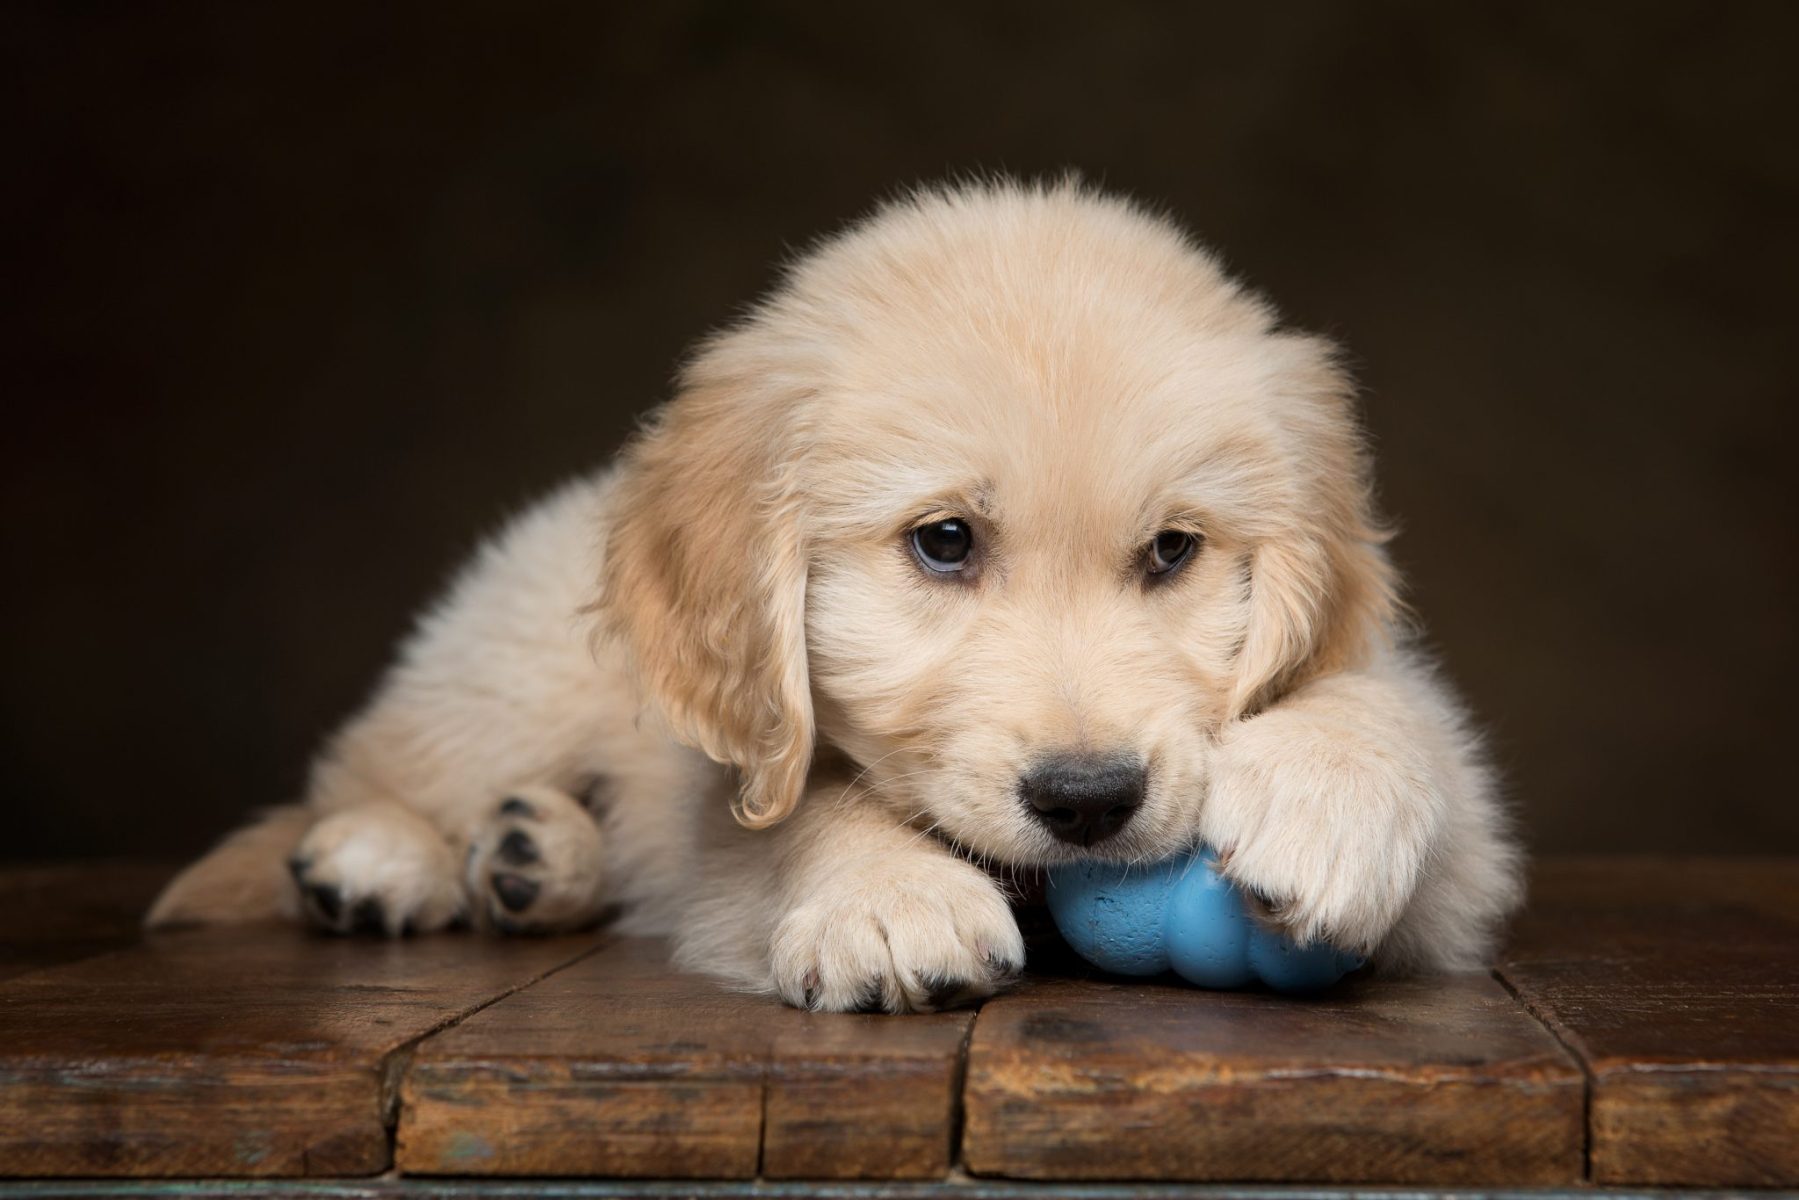 Choosing the Best Chew Toy for Your Puppy